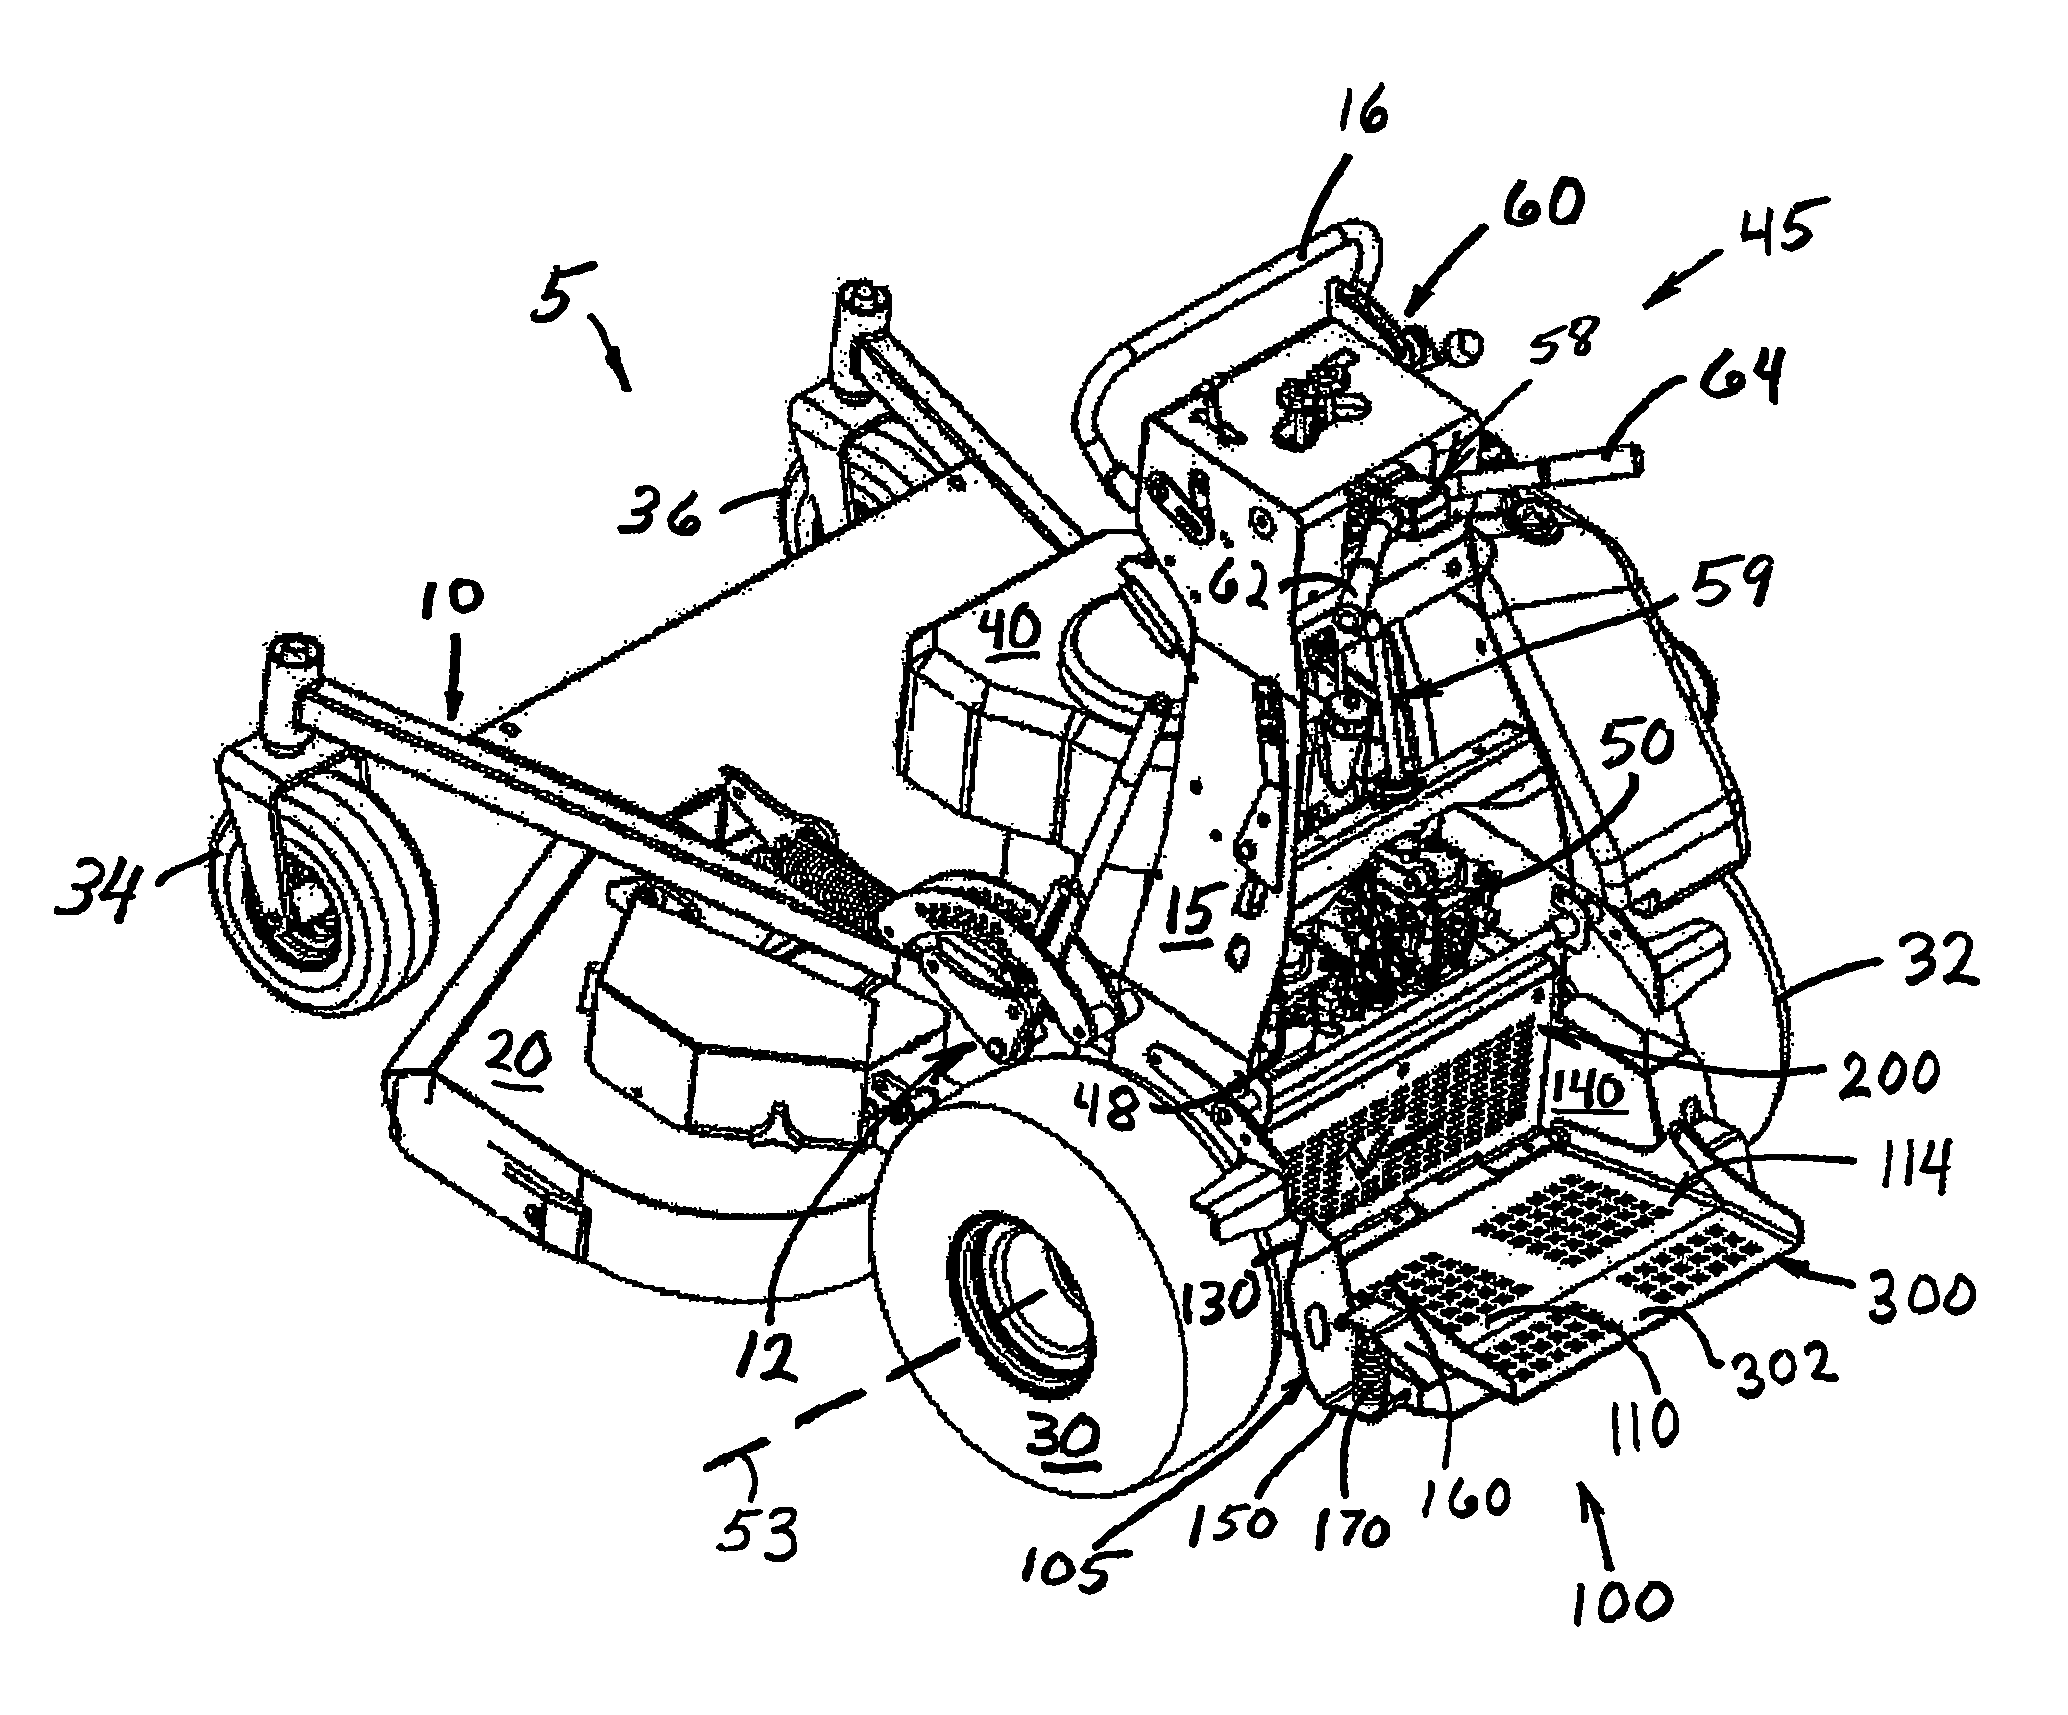 Selectively extendible operator's platform for stand-on lawnmower